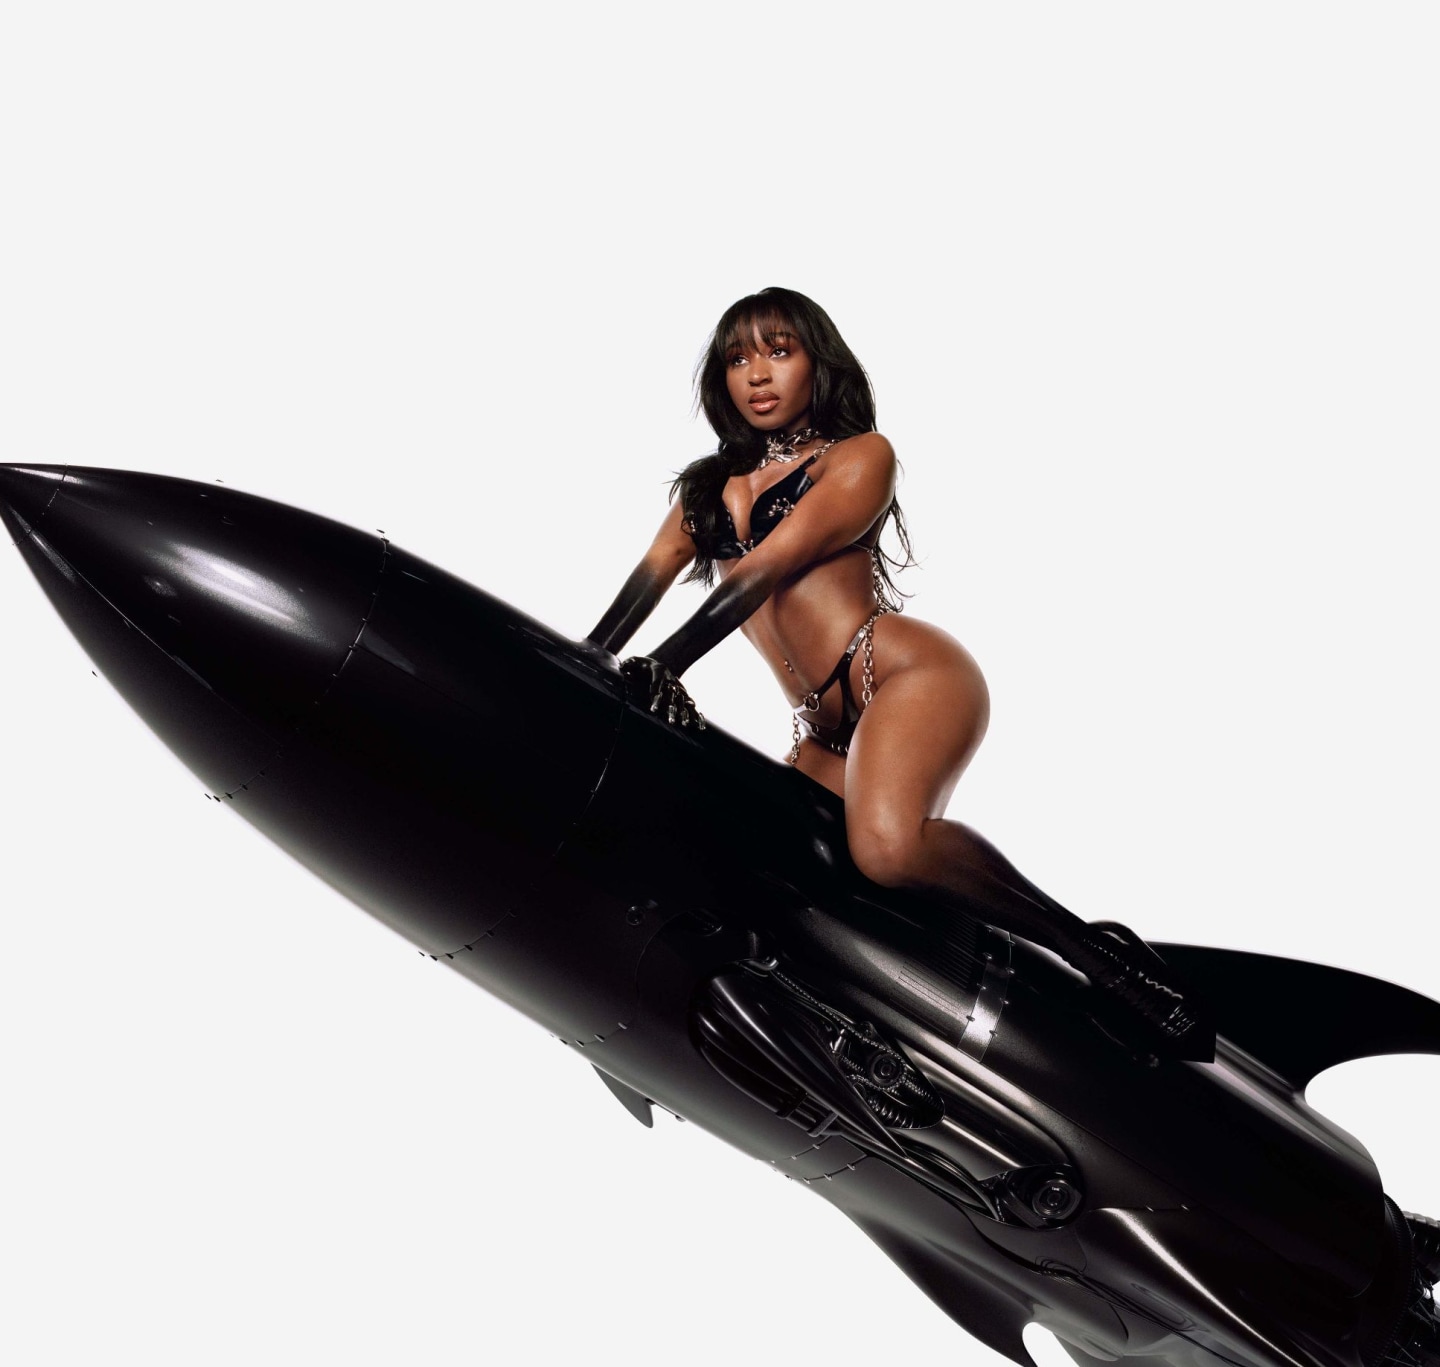 Live News: Normani announces new song, Nicki Minaj ordered to pay $500,000, and more